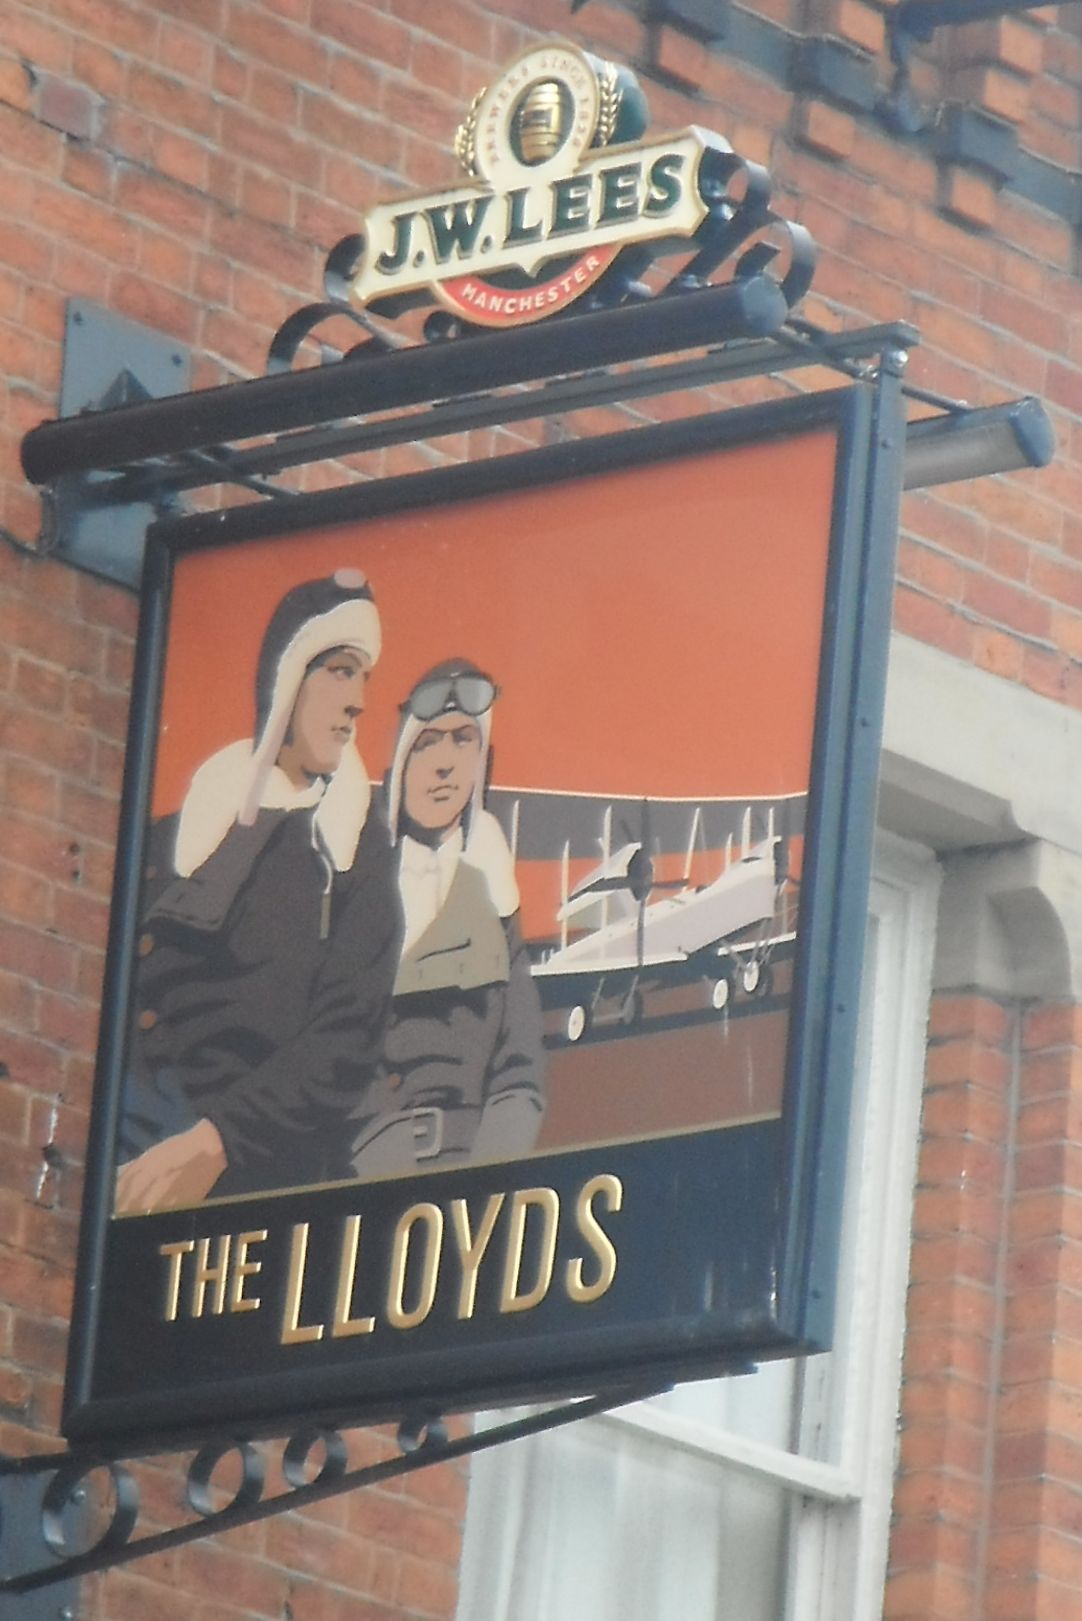 Photo taken by me – pub sign for The Lloyds Hotel Chorlton Manchester